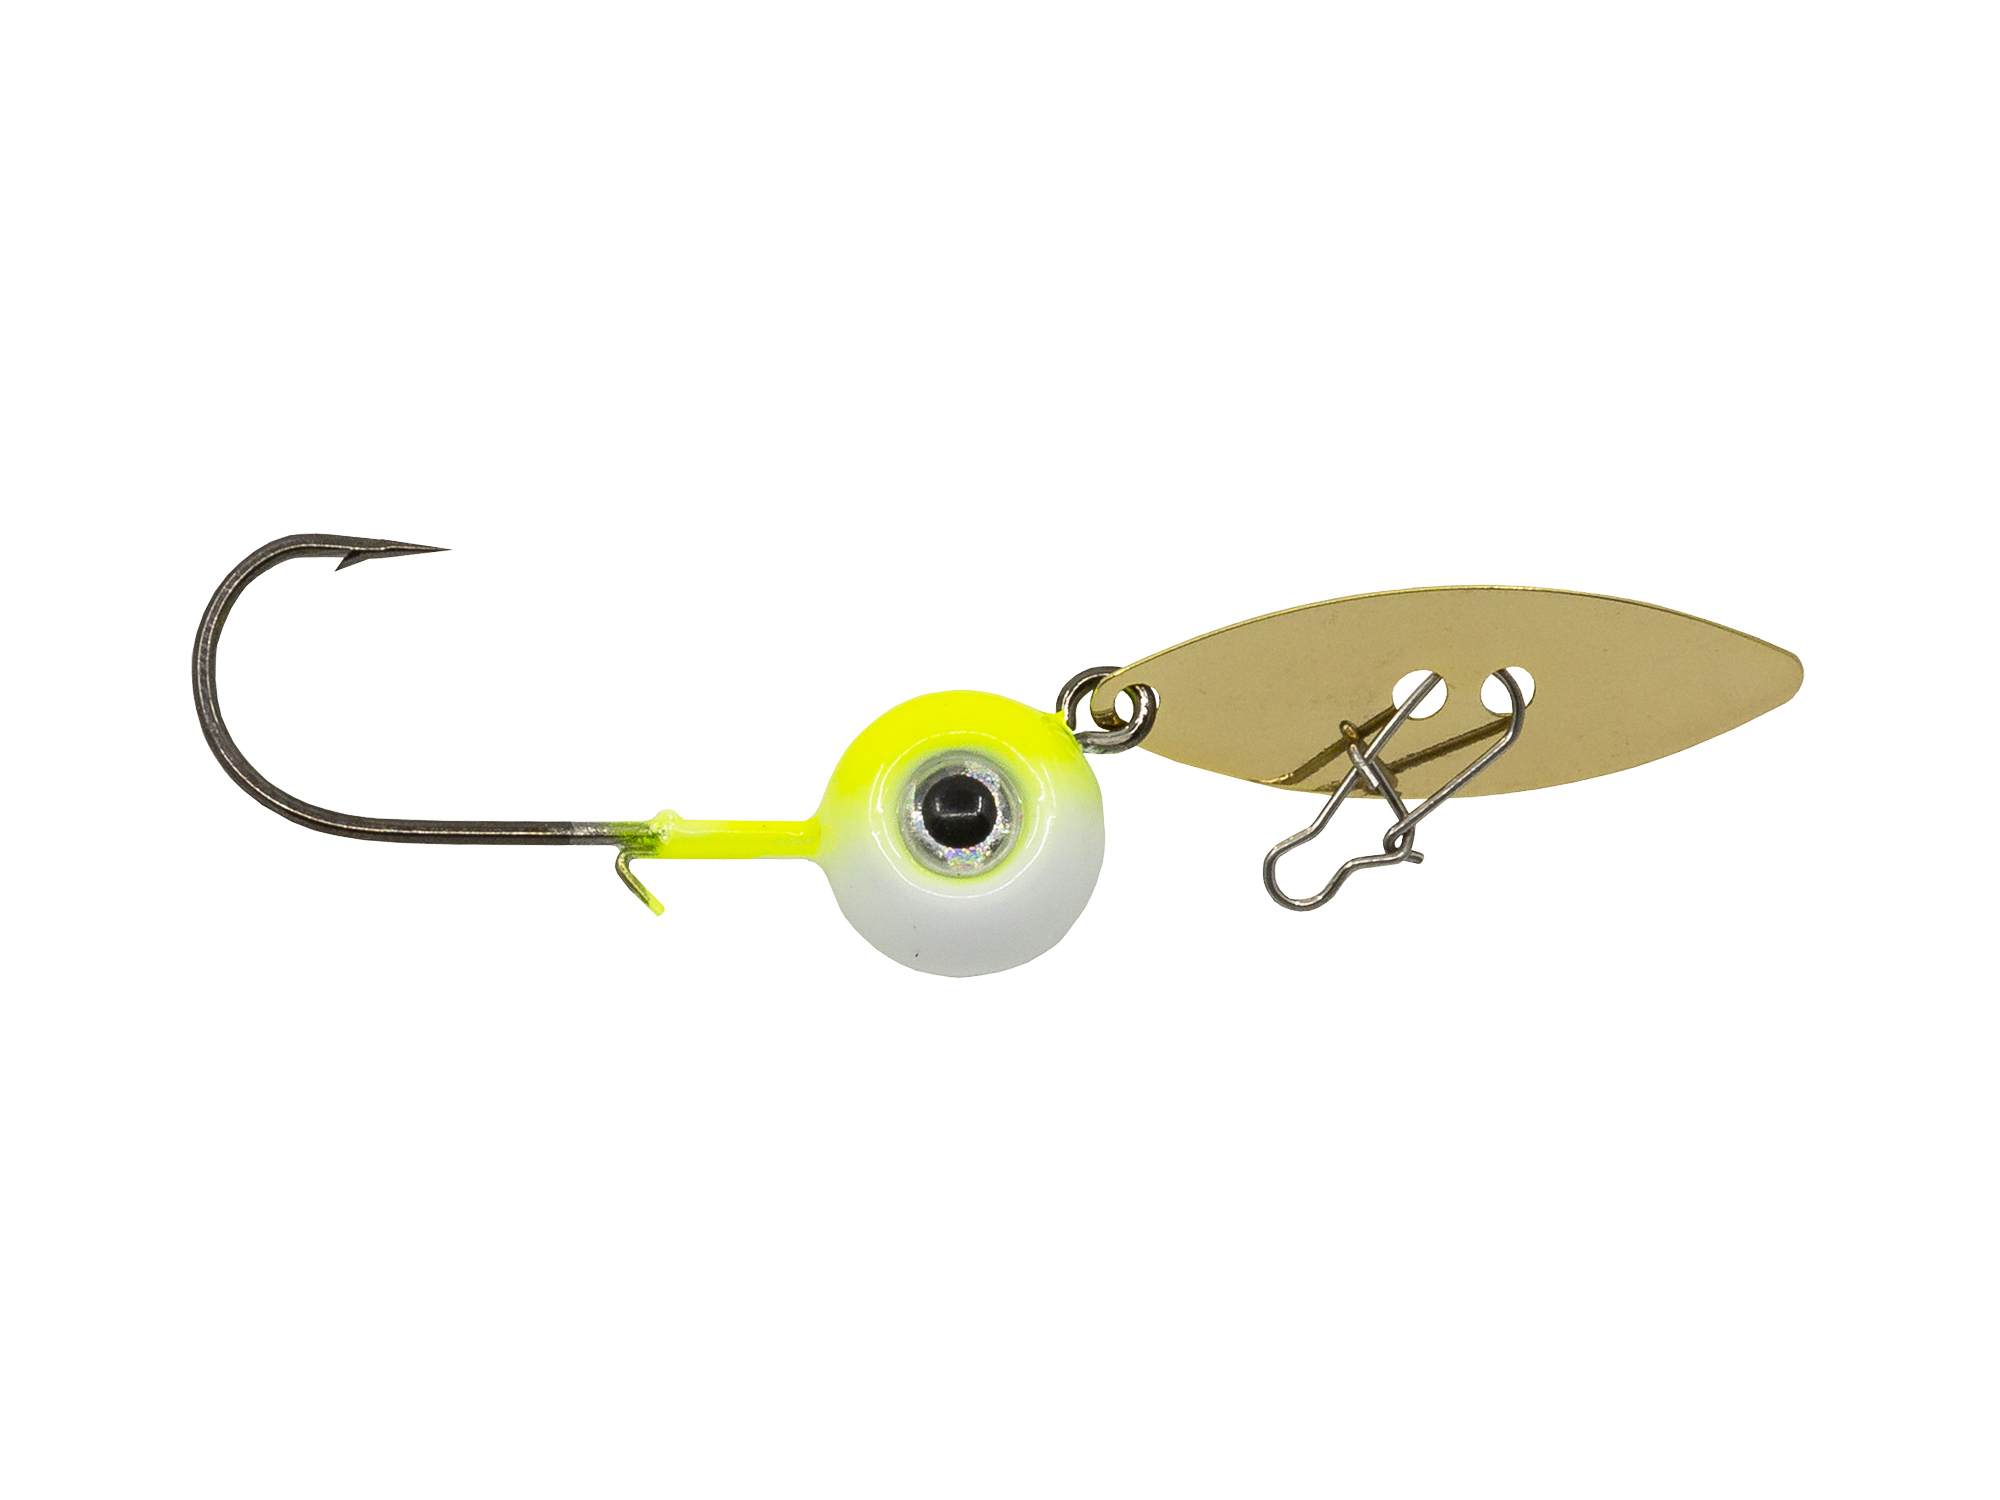 z-man zman willowvibe willow vibe chatterbait 1/4oz pearl willowleaf bladed jig